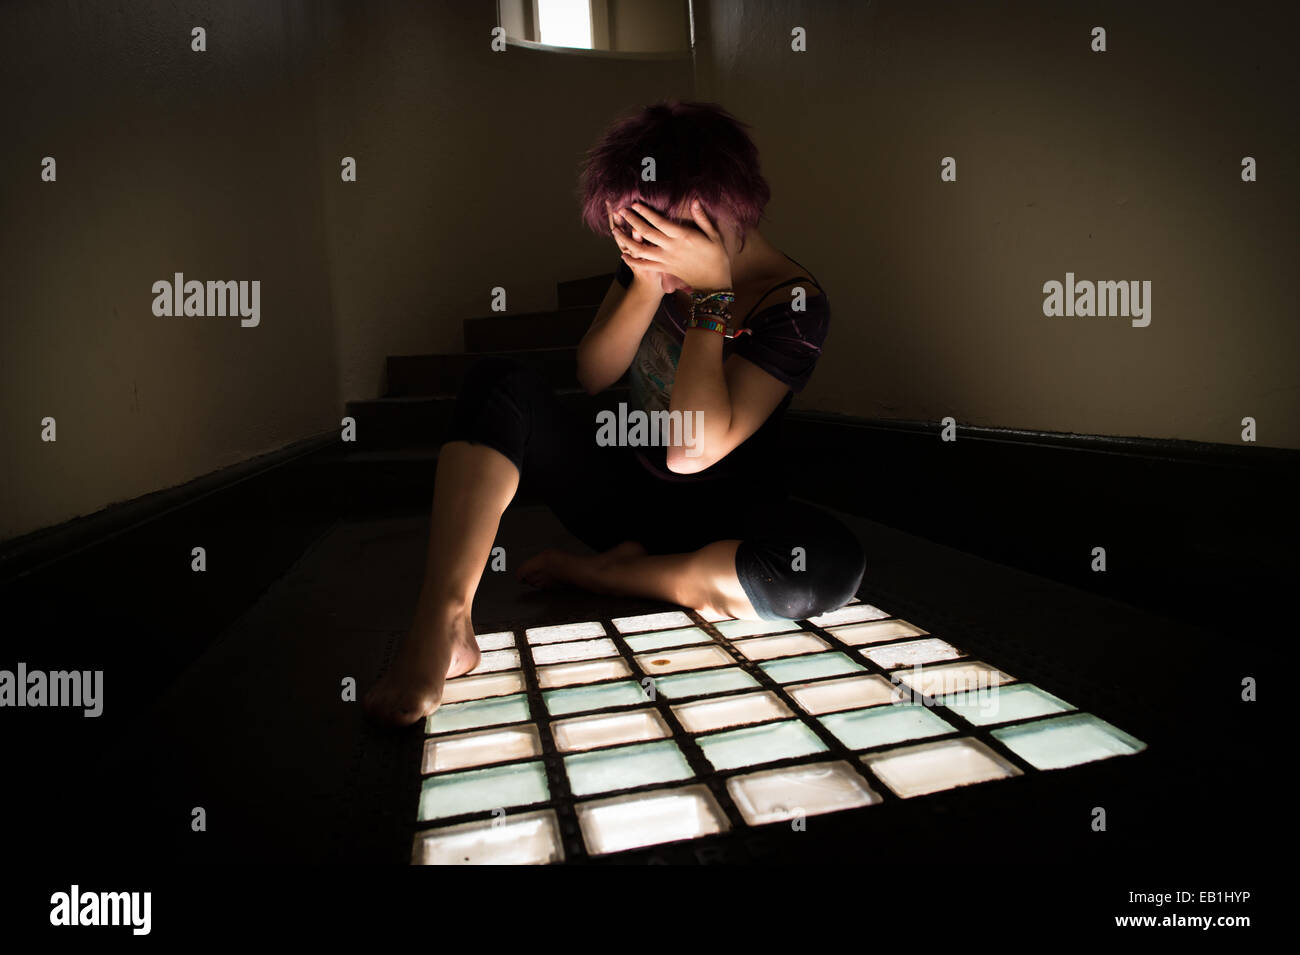 A despairing young teenage girl woman in a prison cell type location with light streaming through a barred window UK Stock Photo